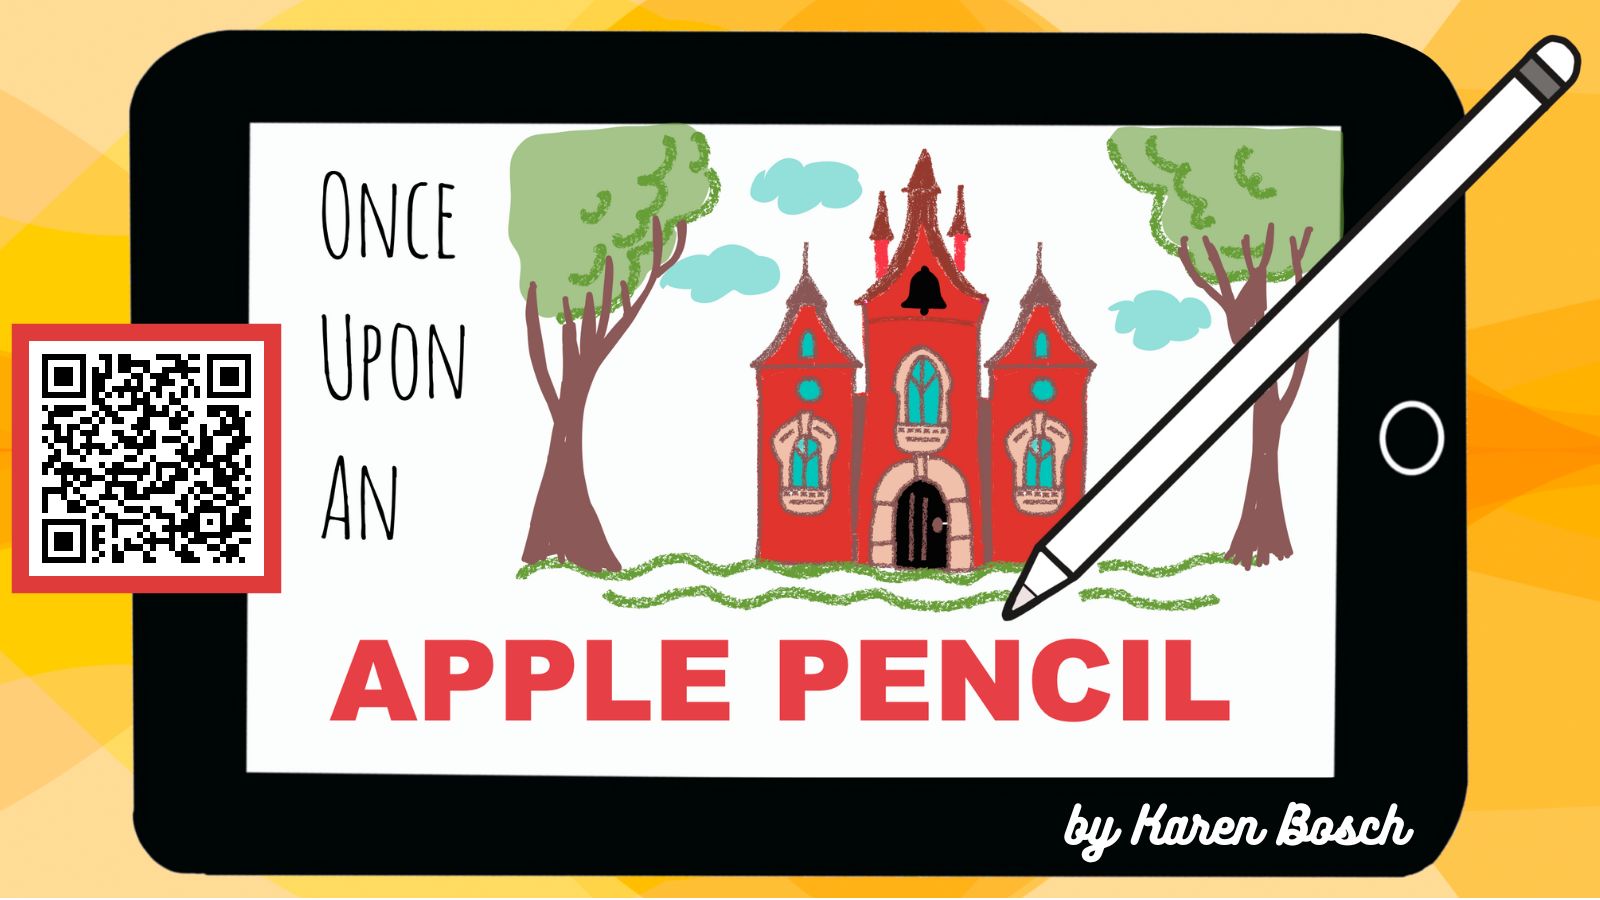 Once Upon an Apple Pencil - iPad with Castle drawn inside and Apple Pencil